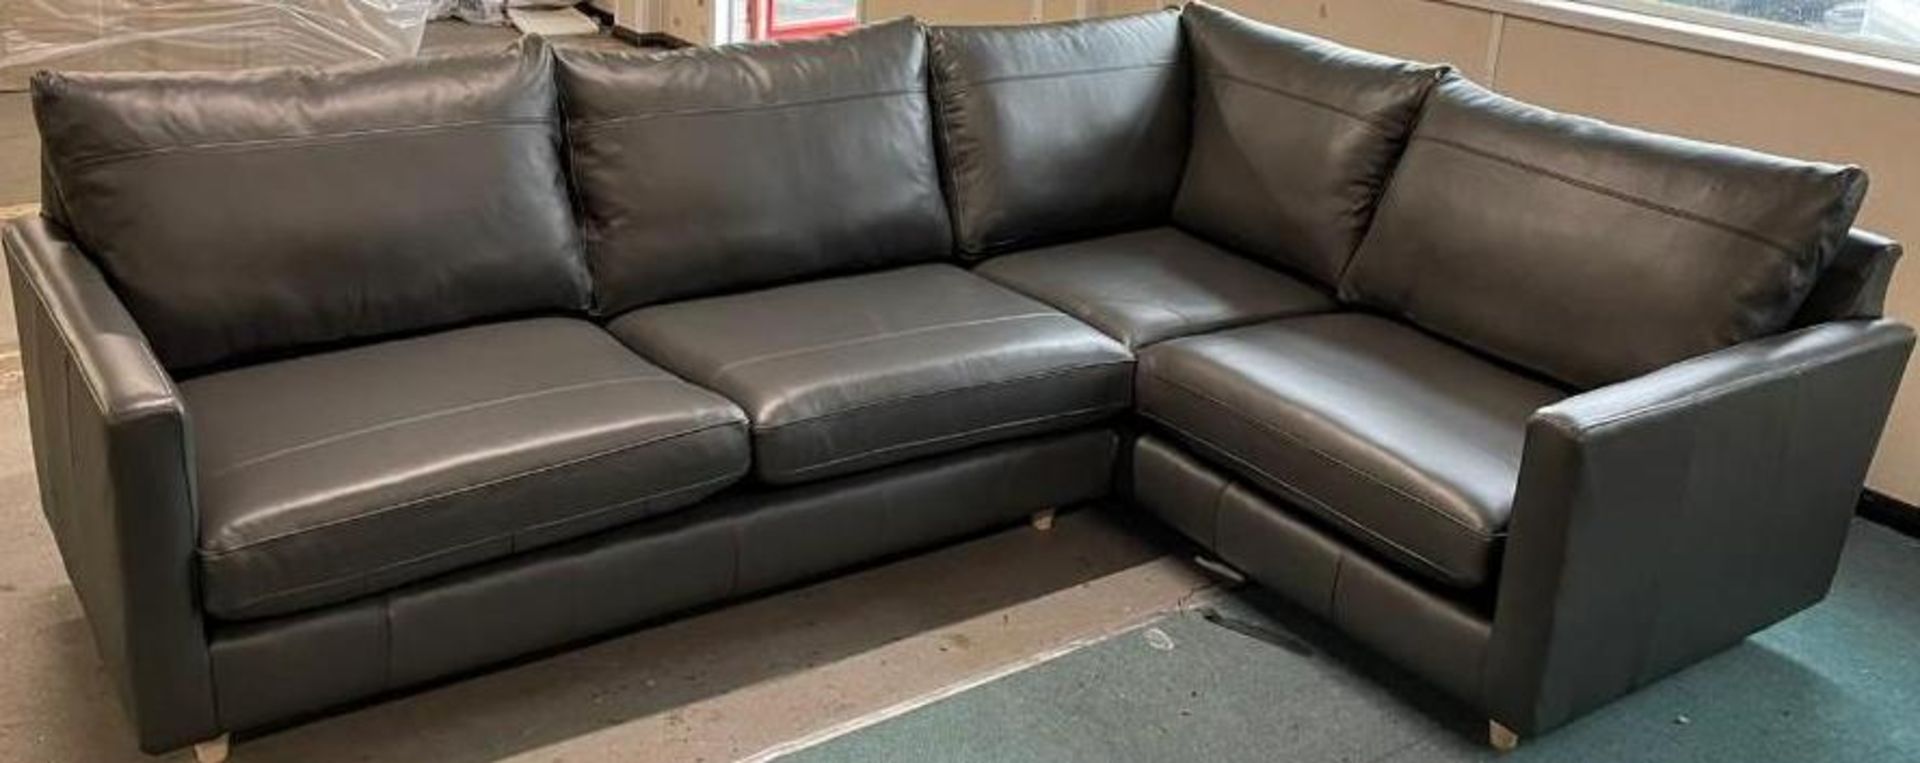 Brand New John Lewis 100% leather Bailey corner sofa in Chestnut Brown - Image 2 of 4